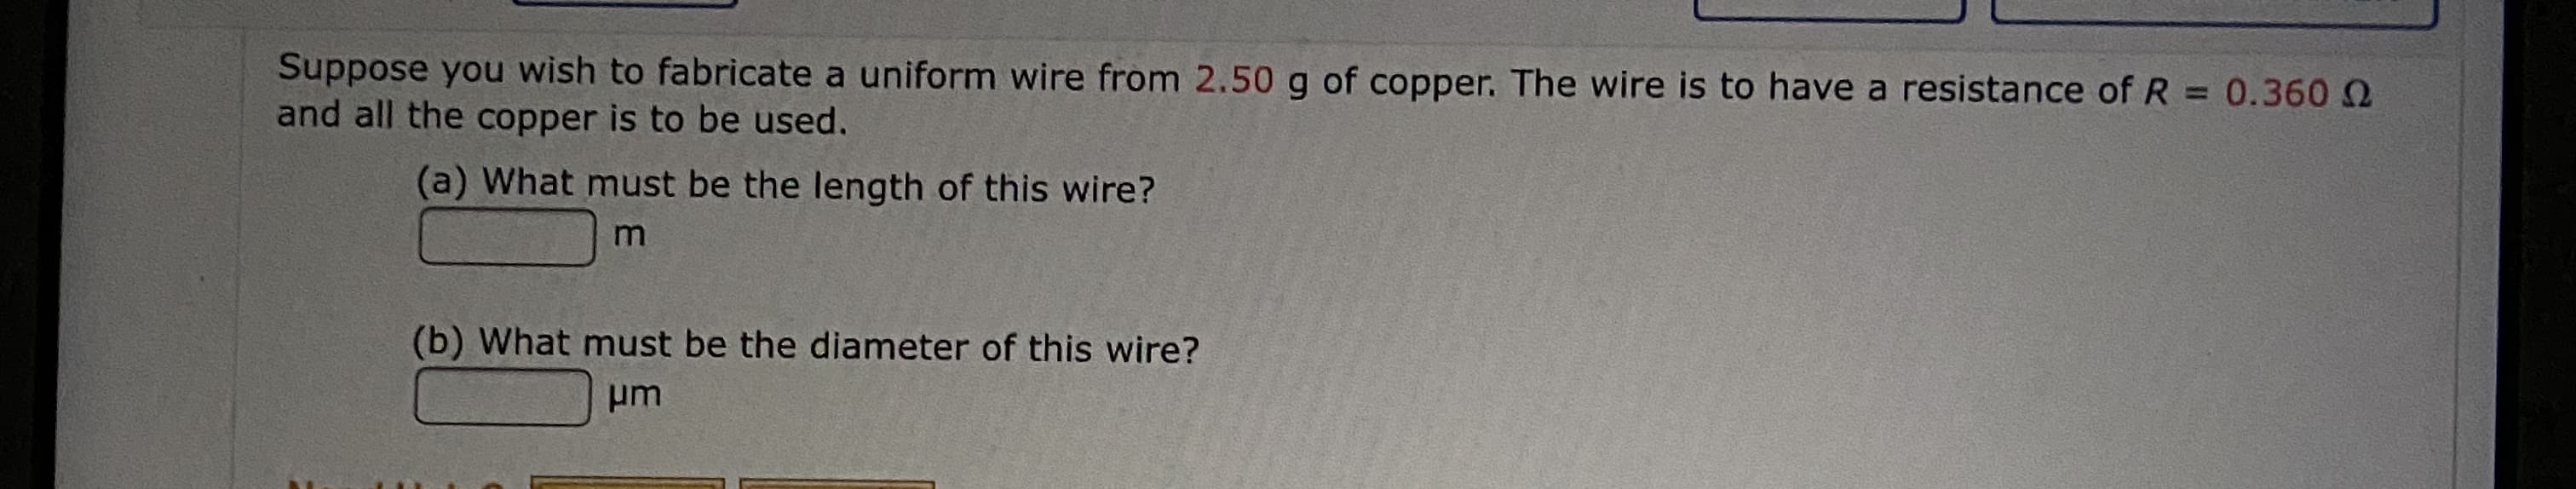 Suppose you wish to fabricate a uniform wire from 2.50 g of copper. The wire is to have a resistance of R = 0.360 2
and all the copper is to be used.
%3D
(a) What must be the length of this wire?
(b) What must be the diameter of this wire?
pm
